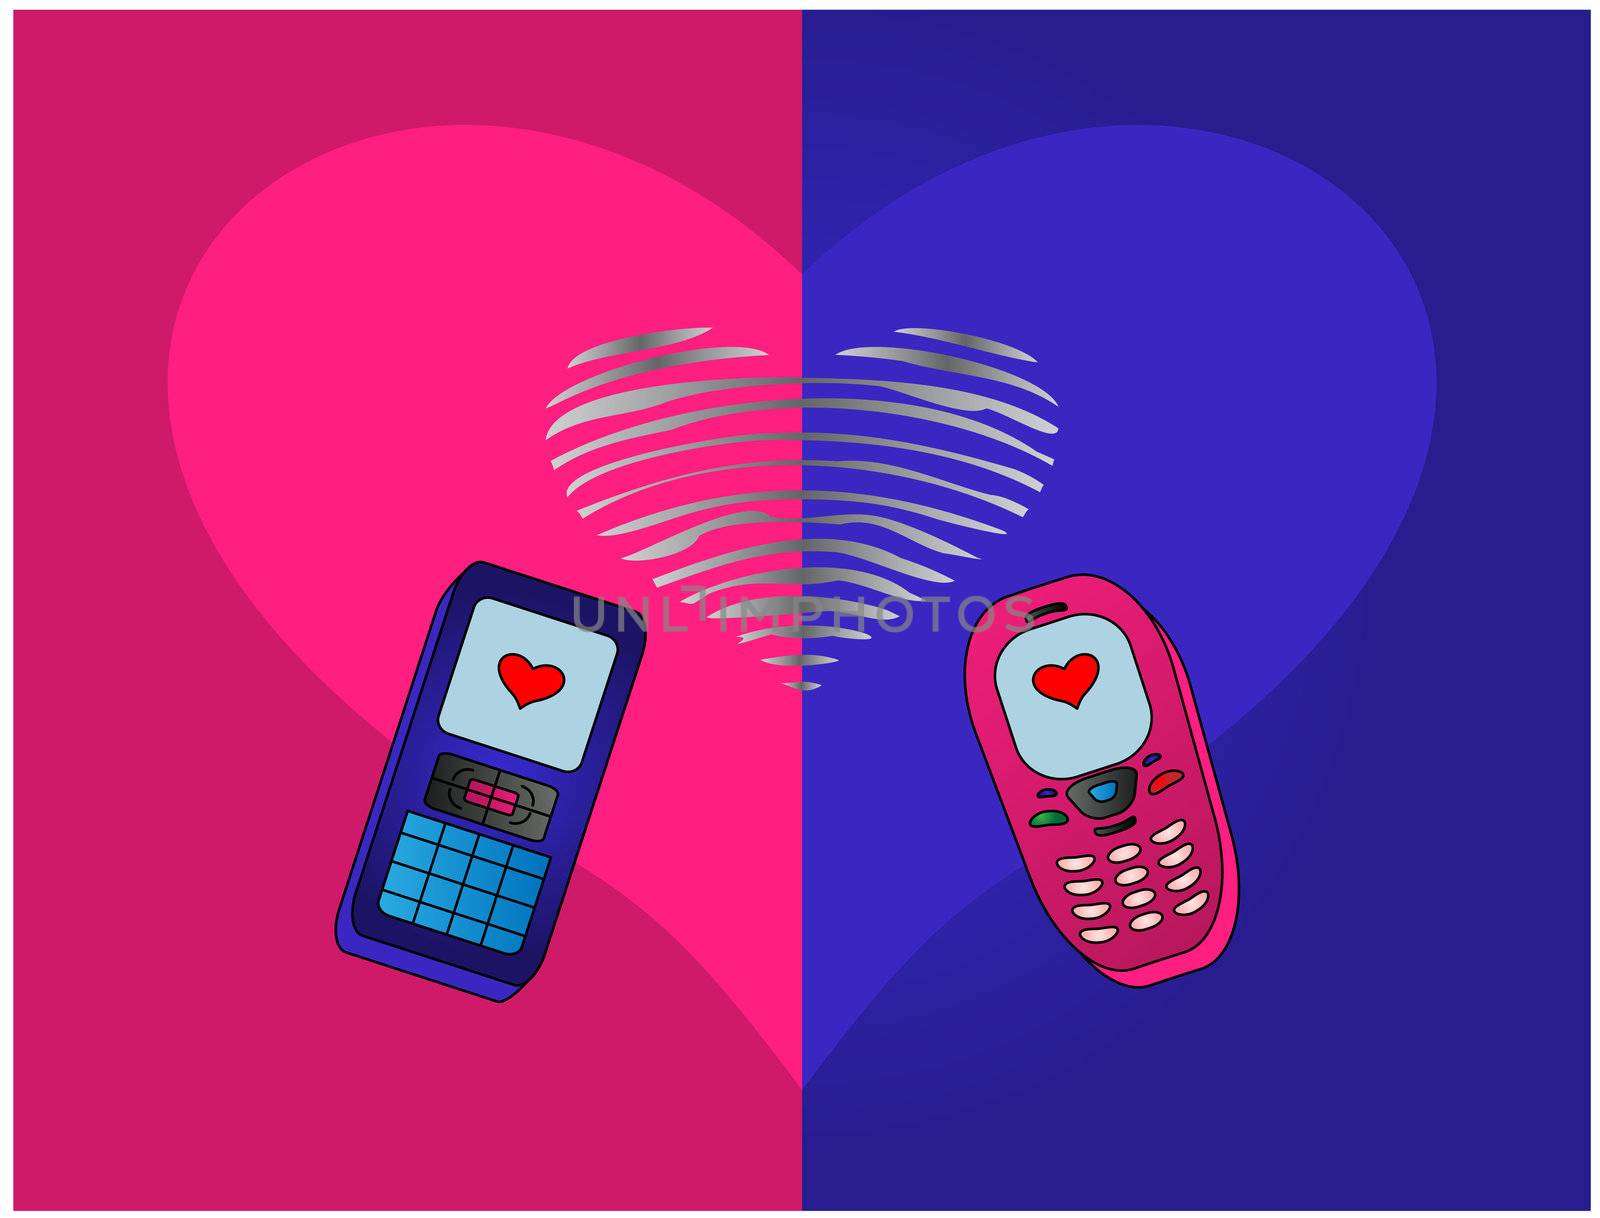 mobile phones, enamoured each other, communicate calls